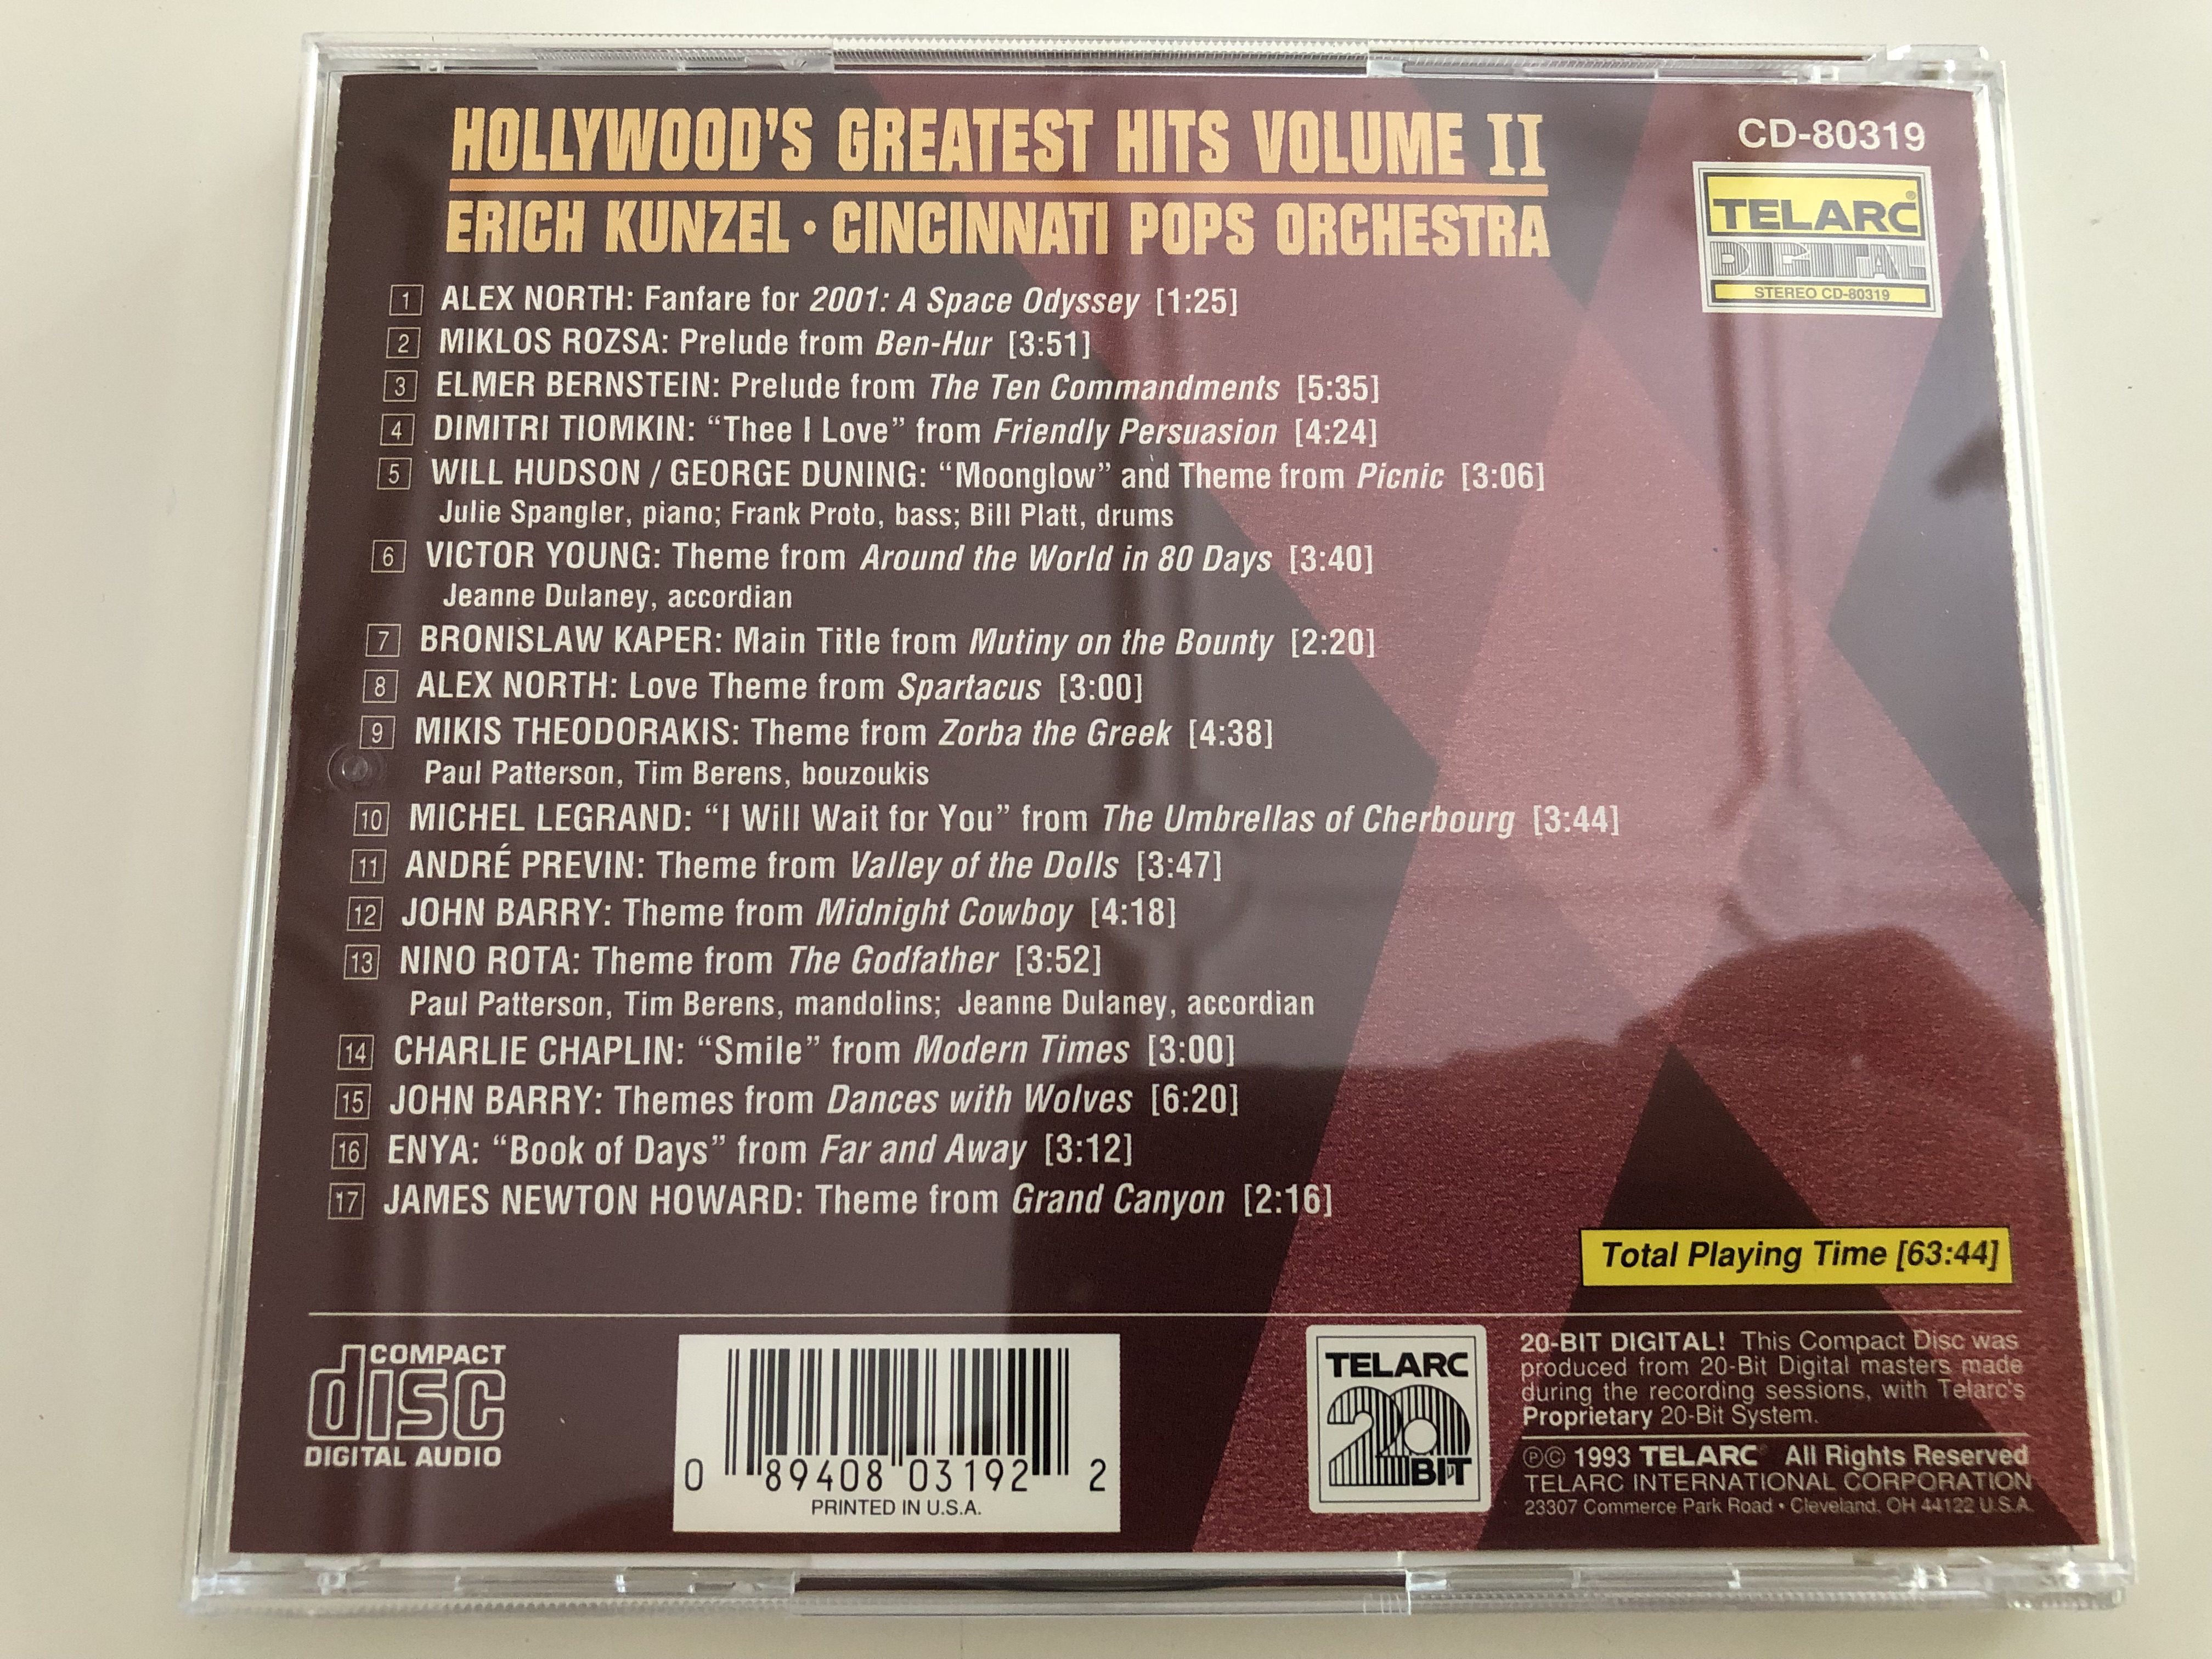 hollywood-s-greatest-hits-volume-2-themes-from-ben-hur-spartacus-zorba-the-greek-far-and-anway-dances-with-wolves-grand-canyon-cincinnati-pops-orchestra-conducted-by-erich-kunzel-telarc-cd-80319-audio-cd-1993-7-.jpg